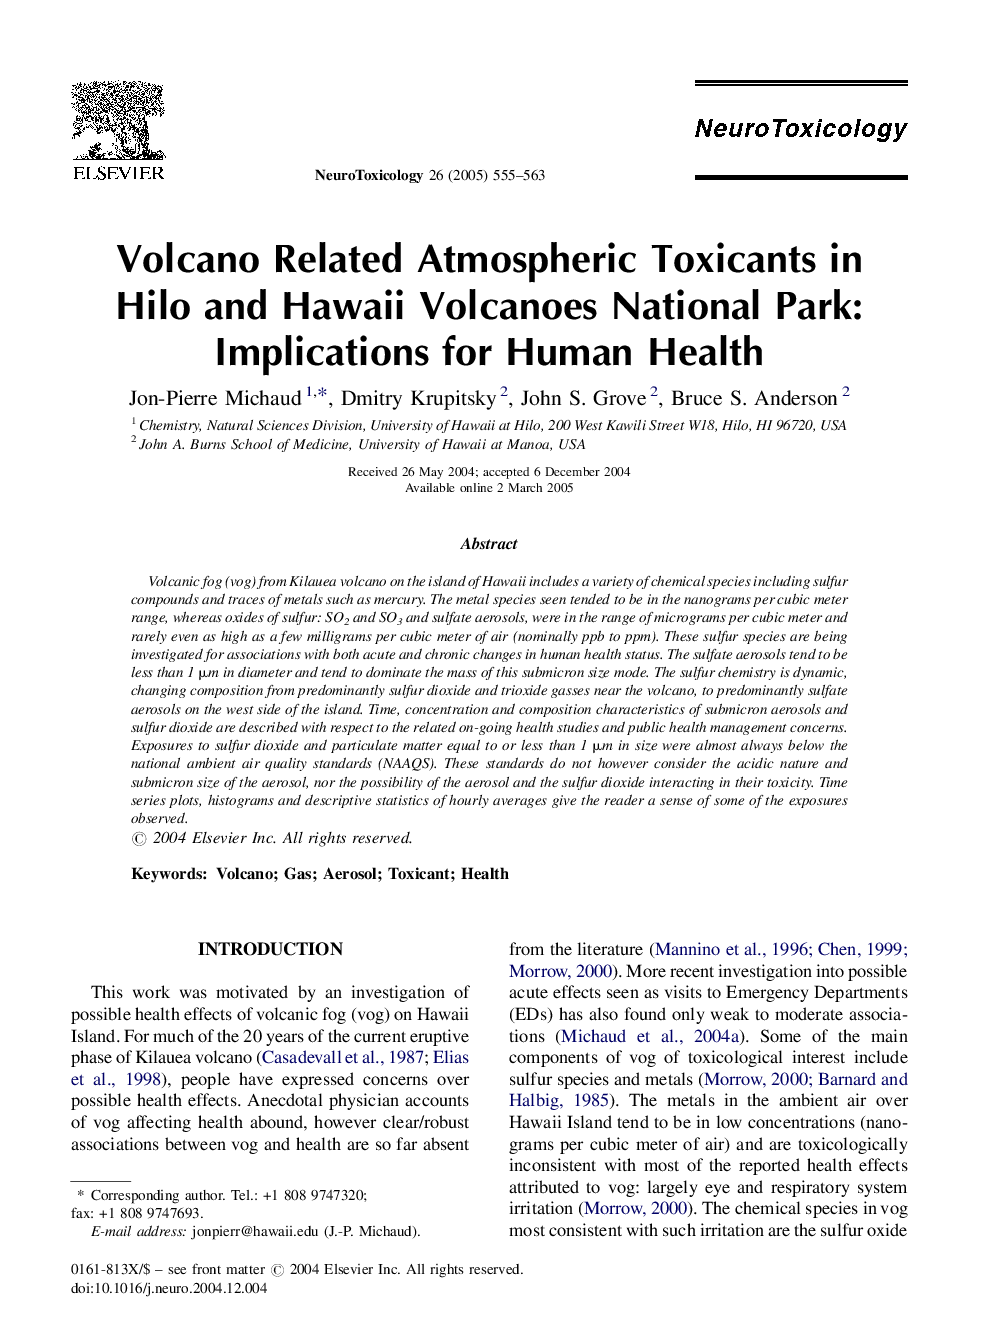 Volcano Related Atmospheric Toxicants in Hilo and Hawaii Volcanoes National Park: Implications for Human Health